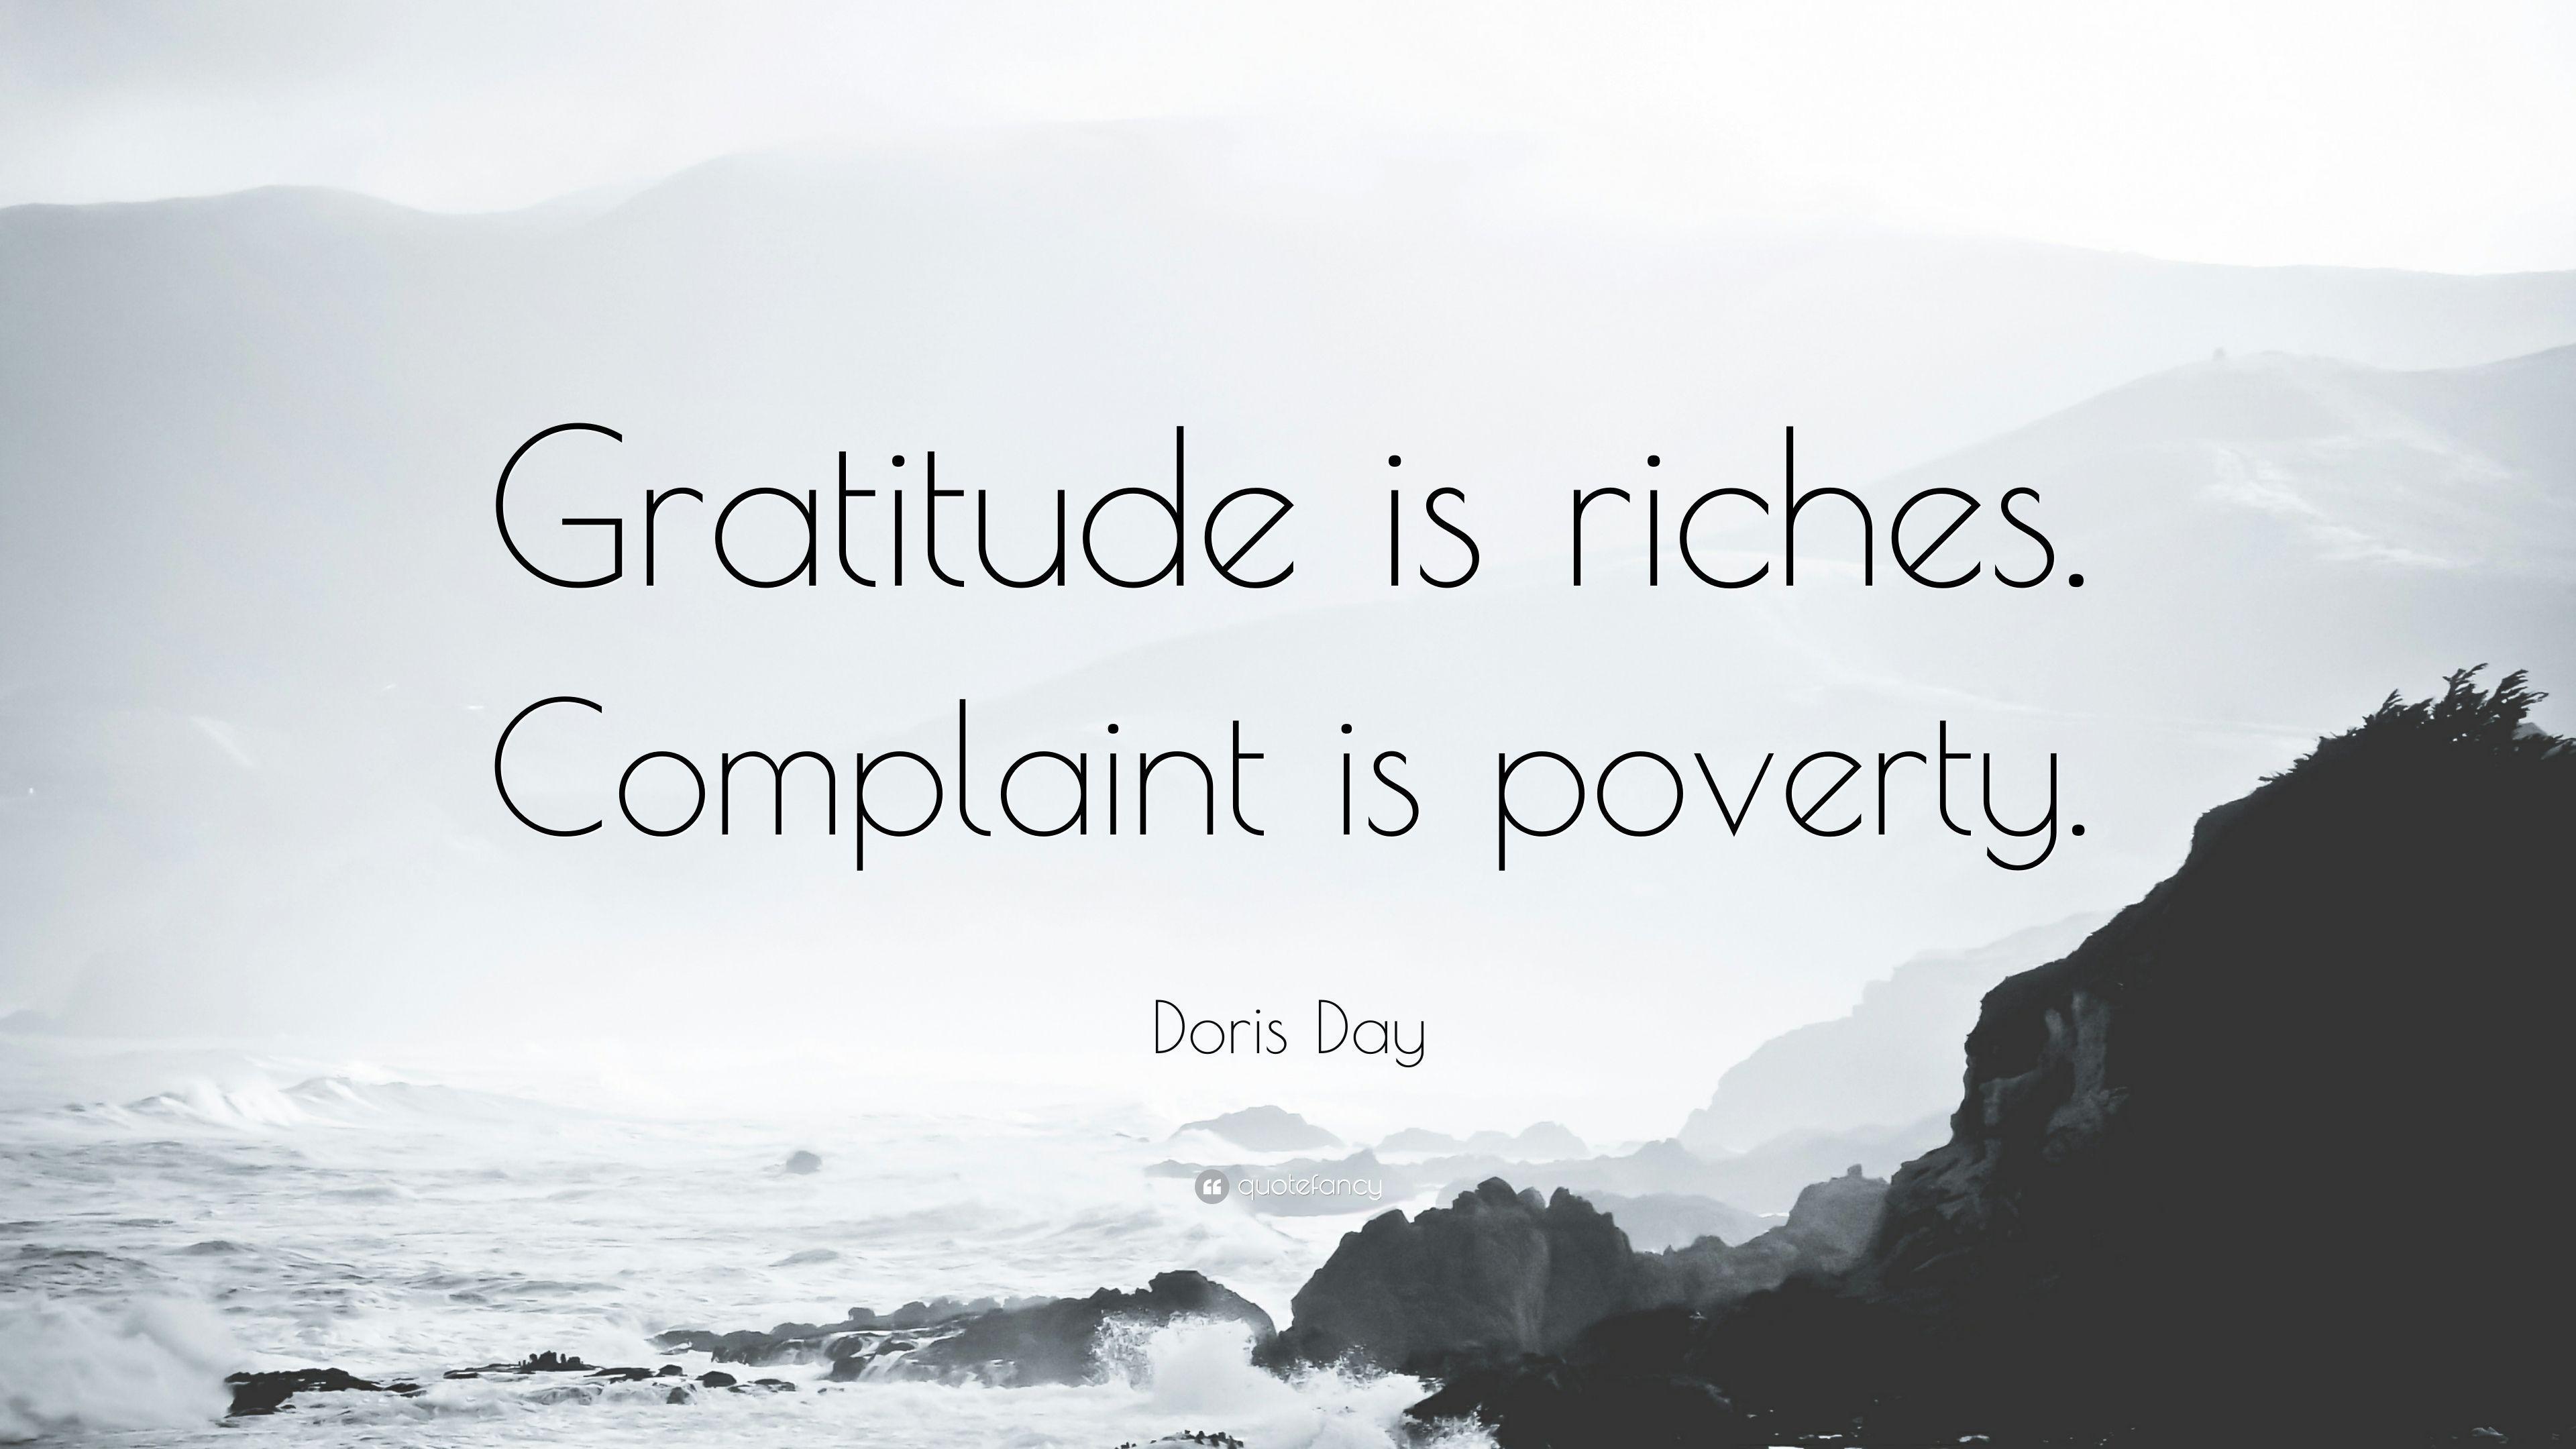 Doris Day Quote: “Gratitude is riches. Complaint is poverty.” 19